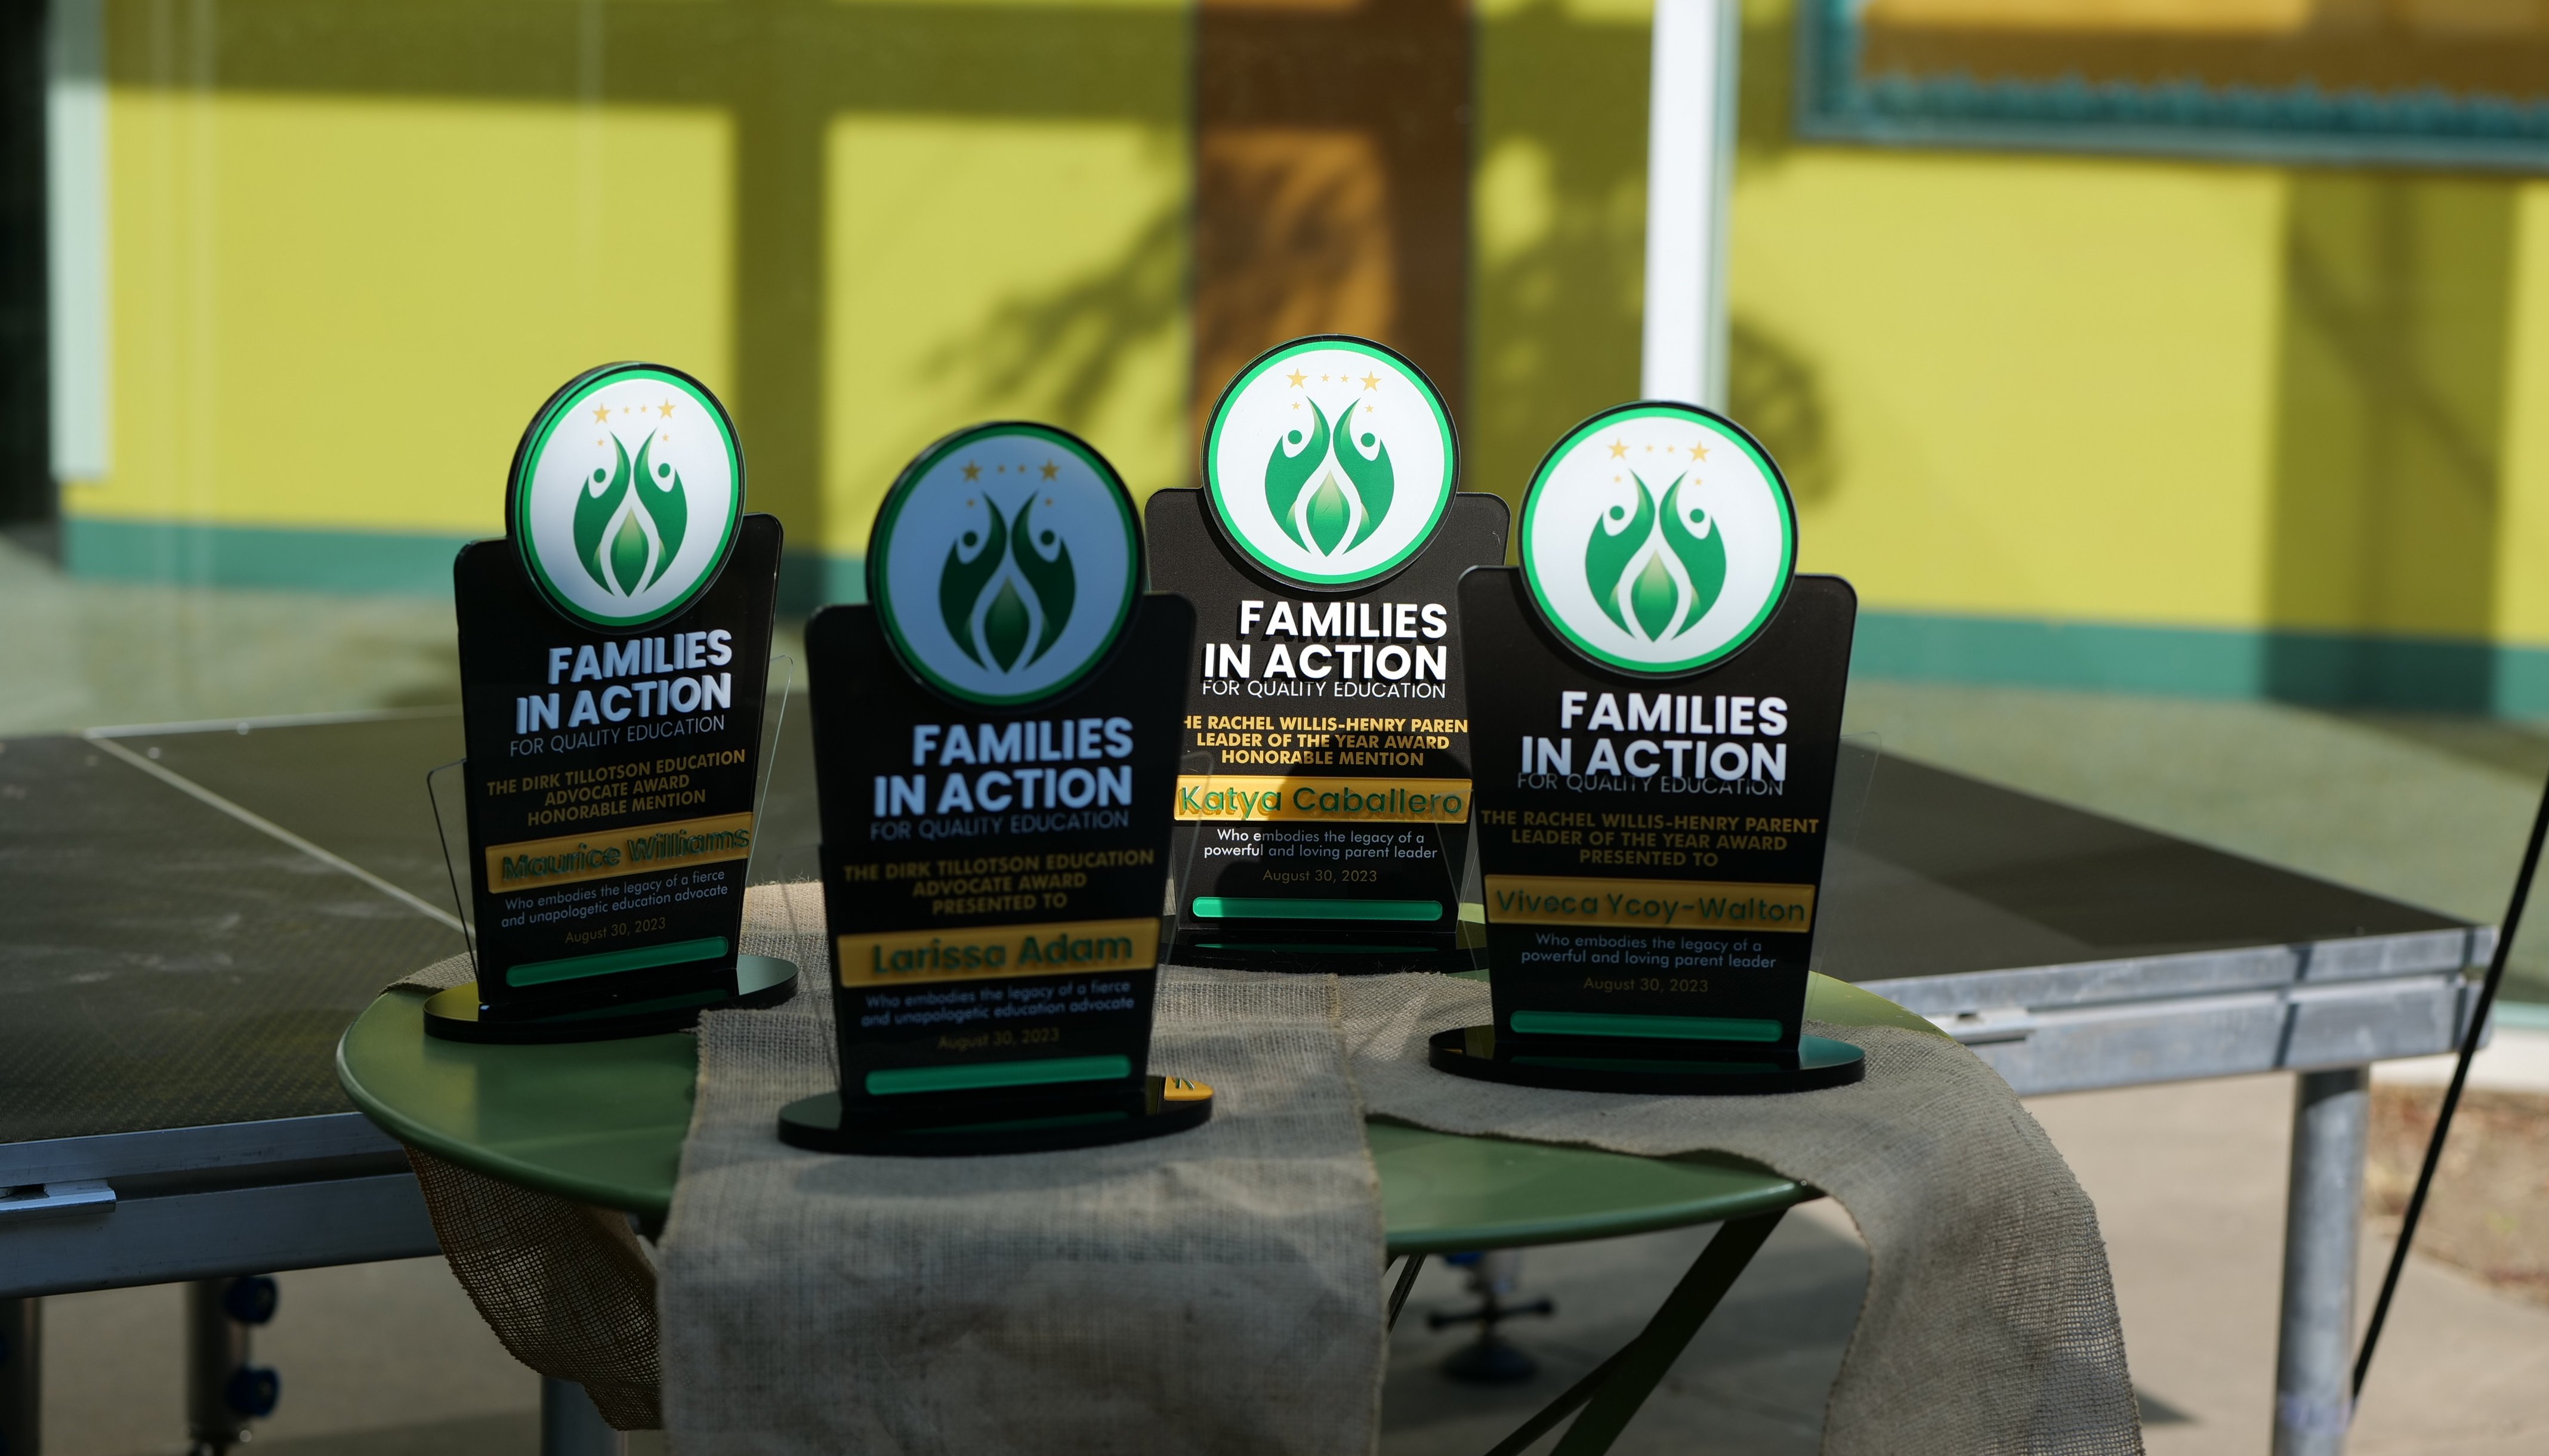 Read 2023 Families in Action for Quality Education Awards&nbsp; by Karen Fee